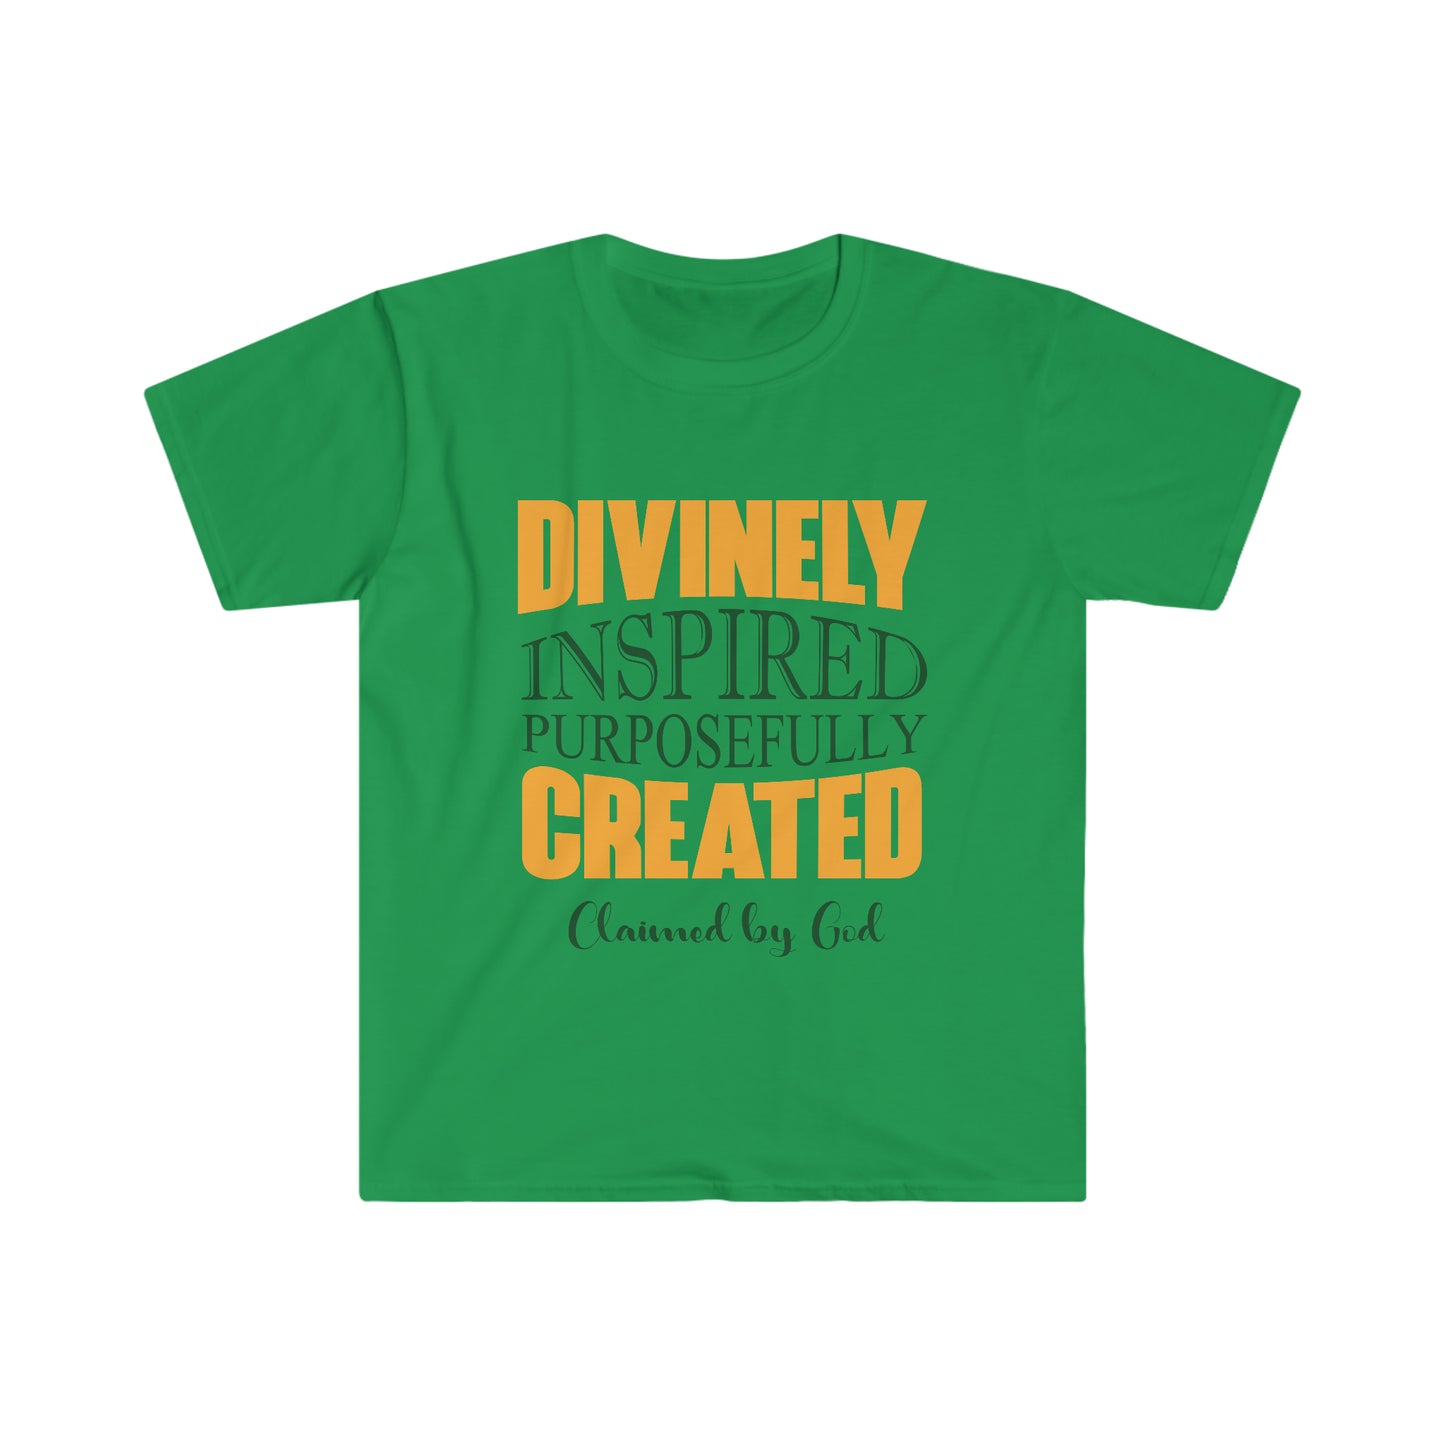 Divinely inspired purposefully created Unisex T-shirt